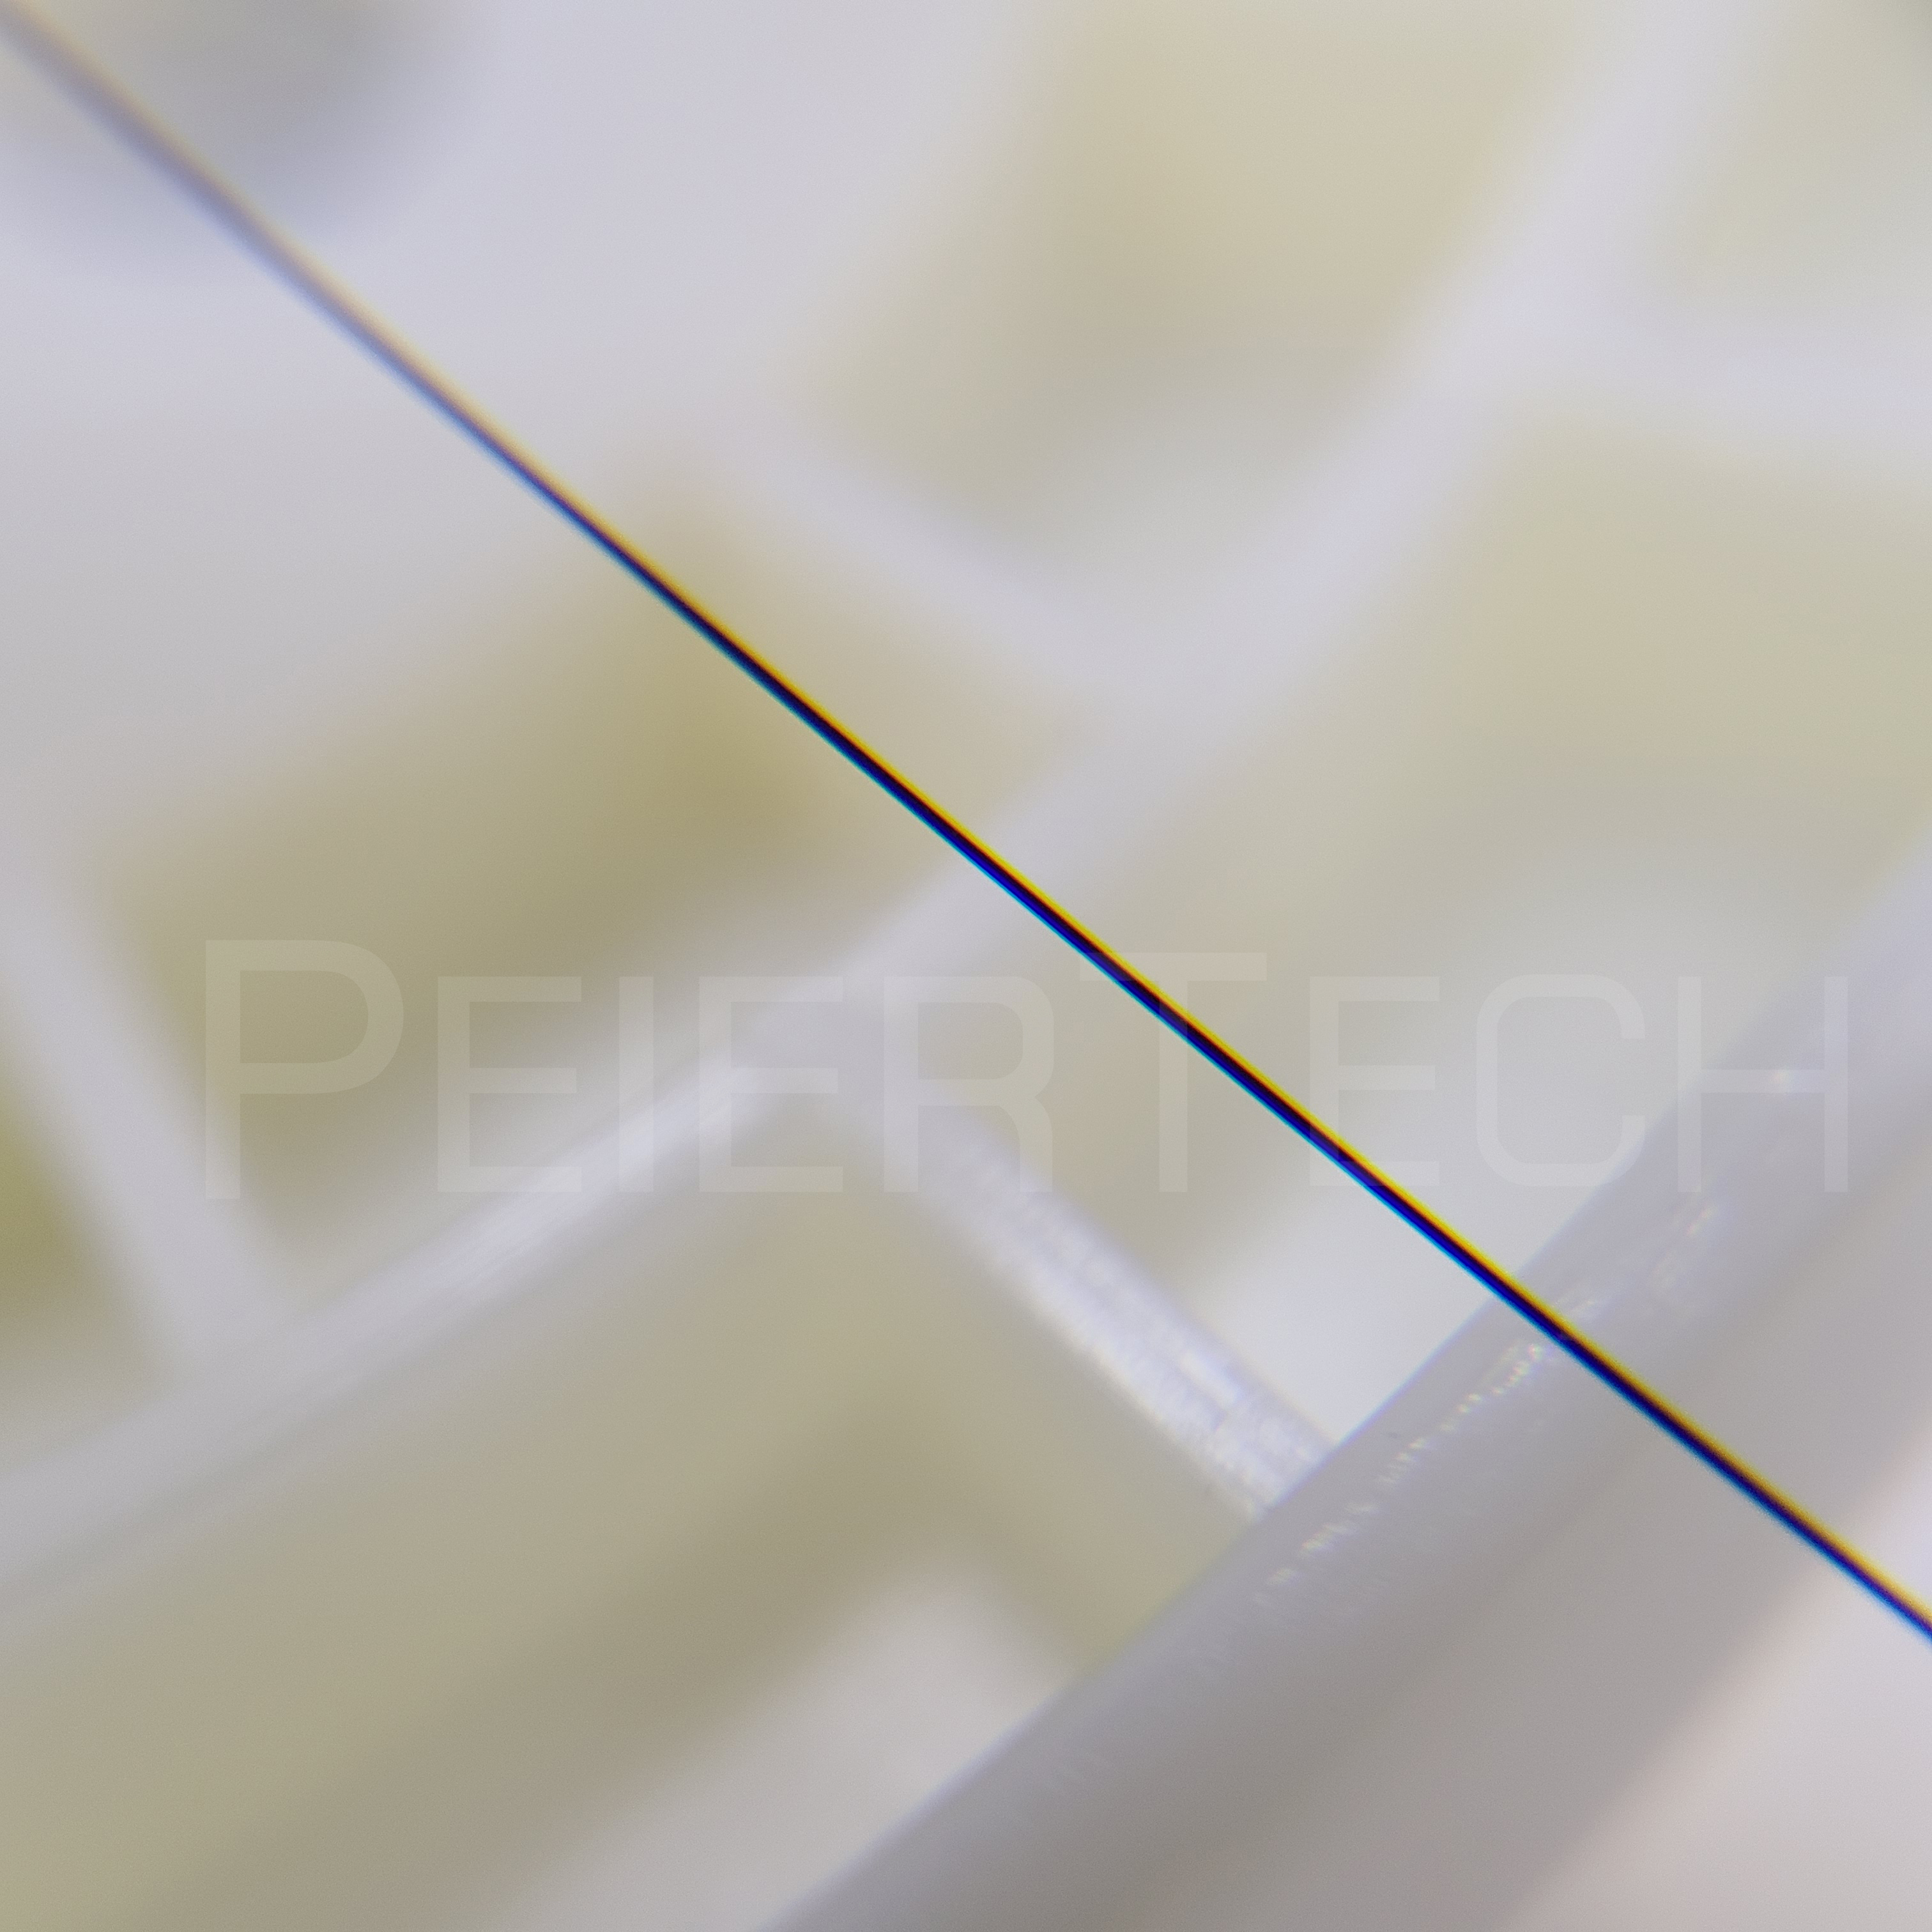 Nitinol Wire Memory Wires Peiertech produces special NiTi alloy products for medical devices